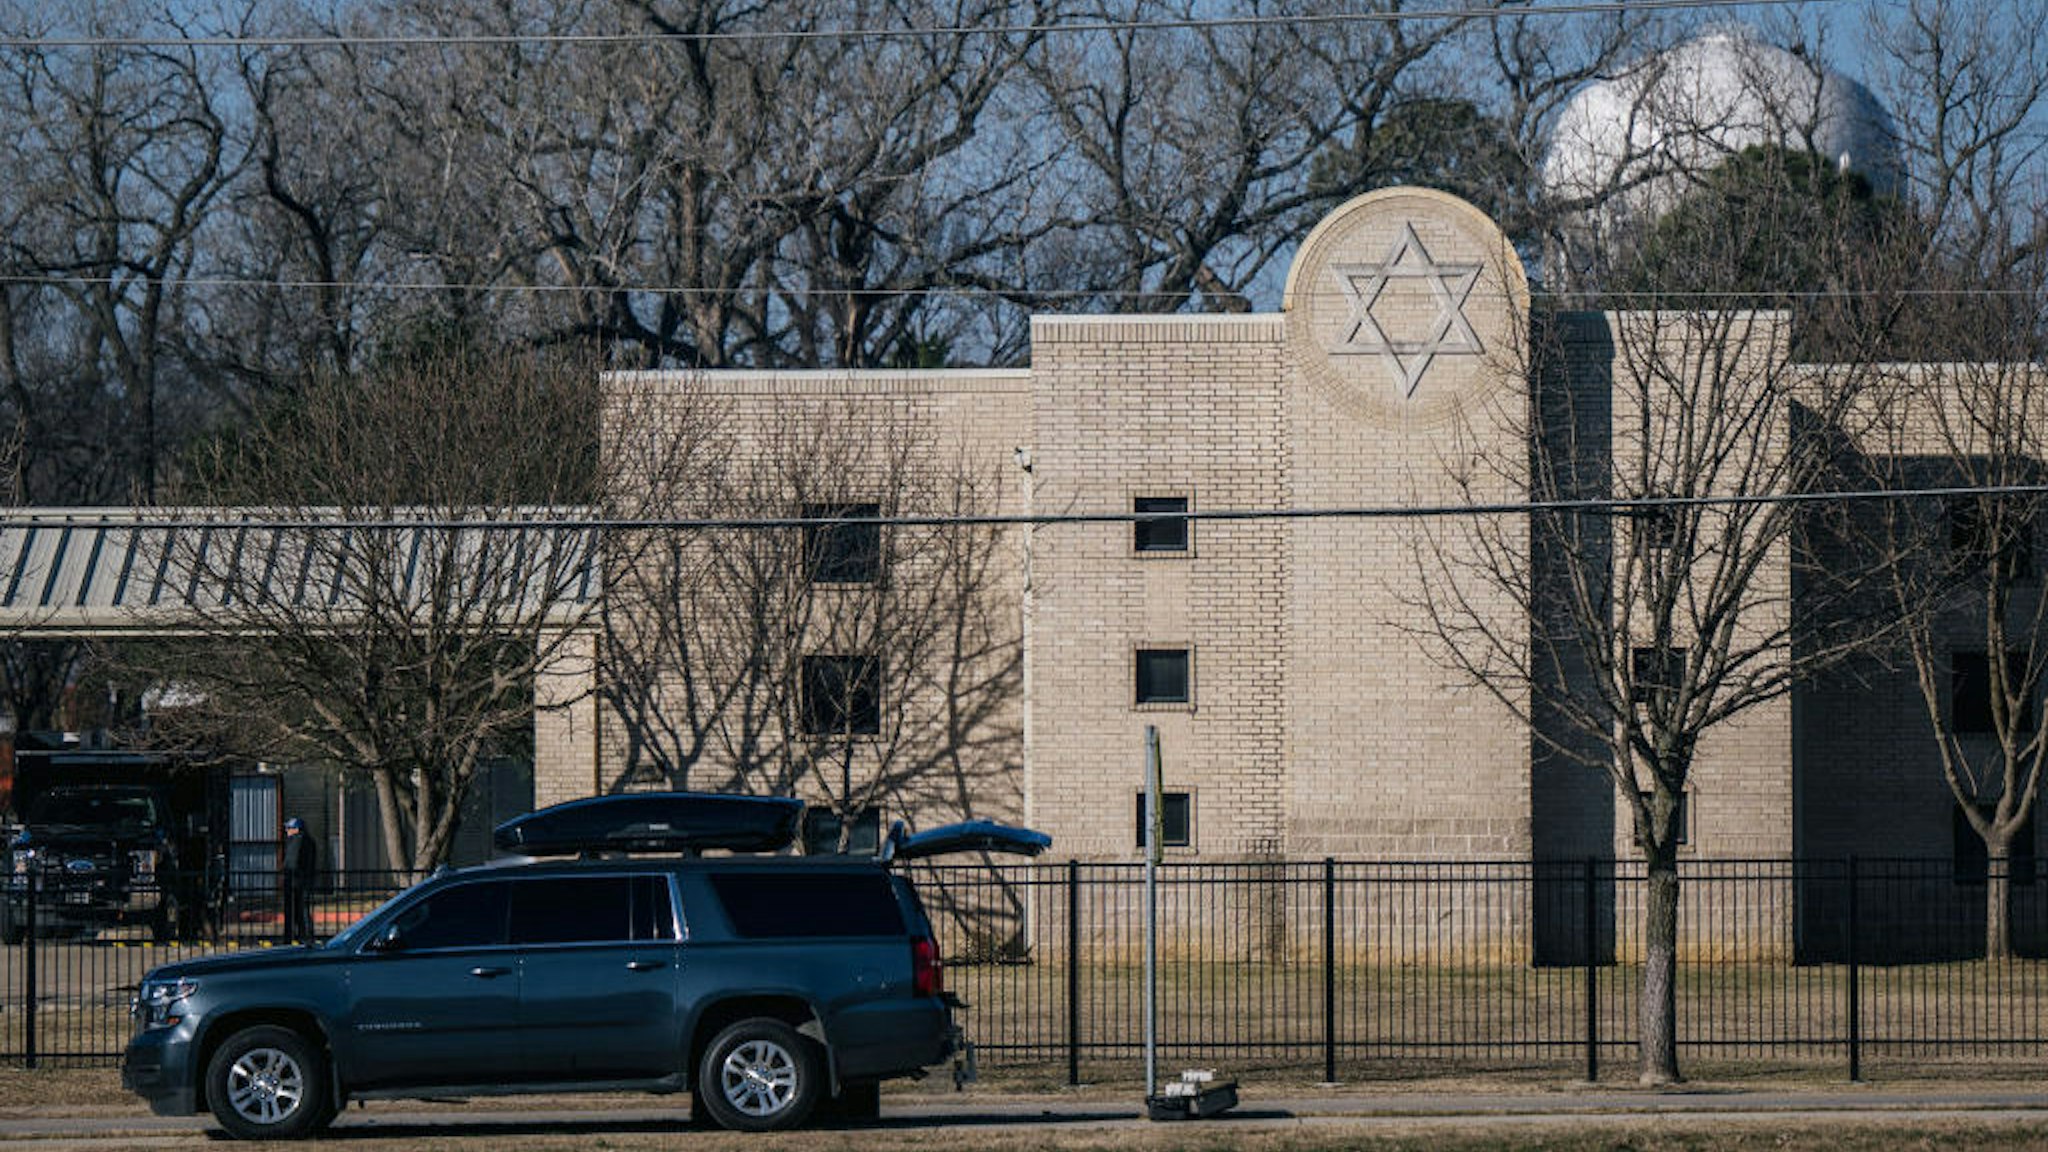 COLLEYVILLE, TEXAS - JANUARY 16: Law enforcement officers conduct inspections around the Congregation Beth Israel synagogue on January 16, 2022 in Colleyville, Texas. All four people who were held hostage at the Congregation Beth Israel synagogue have been safely released after more than 10 hours of being held captive by a gunman. Yesterday, police responded to a hostage situation after reports of a man with a gun was holding people captive. (Photo by Brandon Bell/Getty Images)